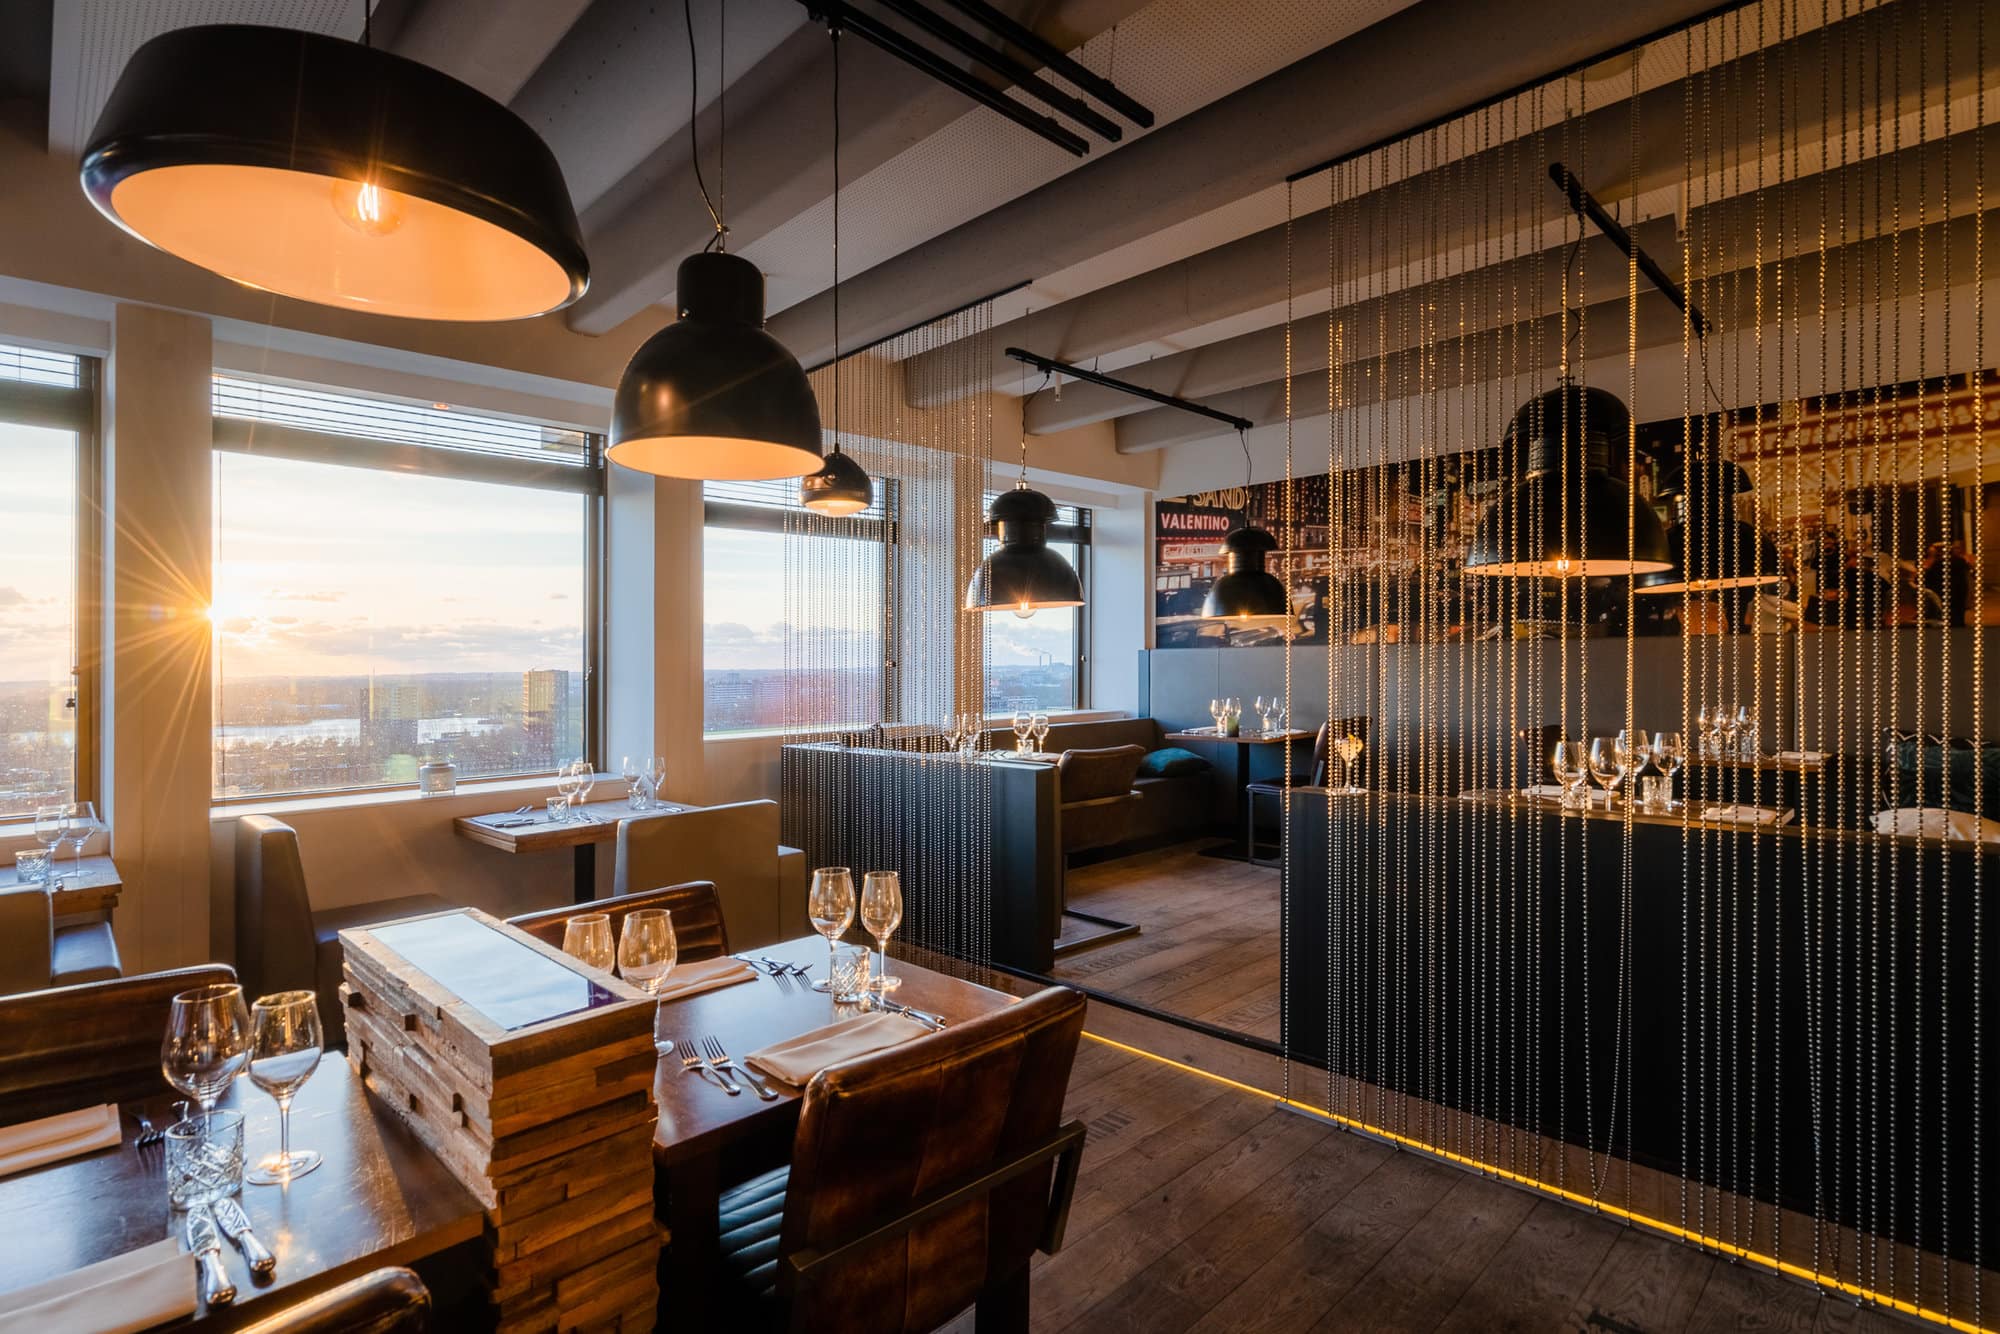 Floor17 Restaurant Tail Bar With Rooftop Terrace Amsterdam